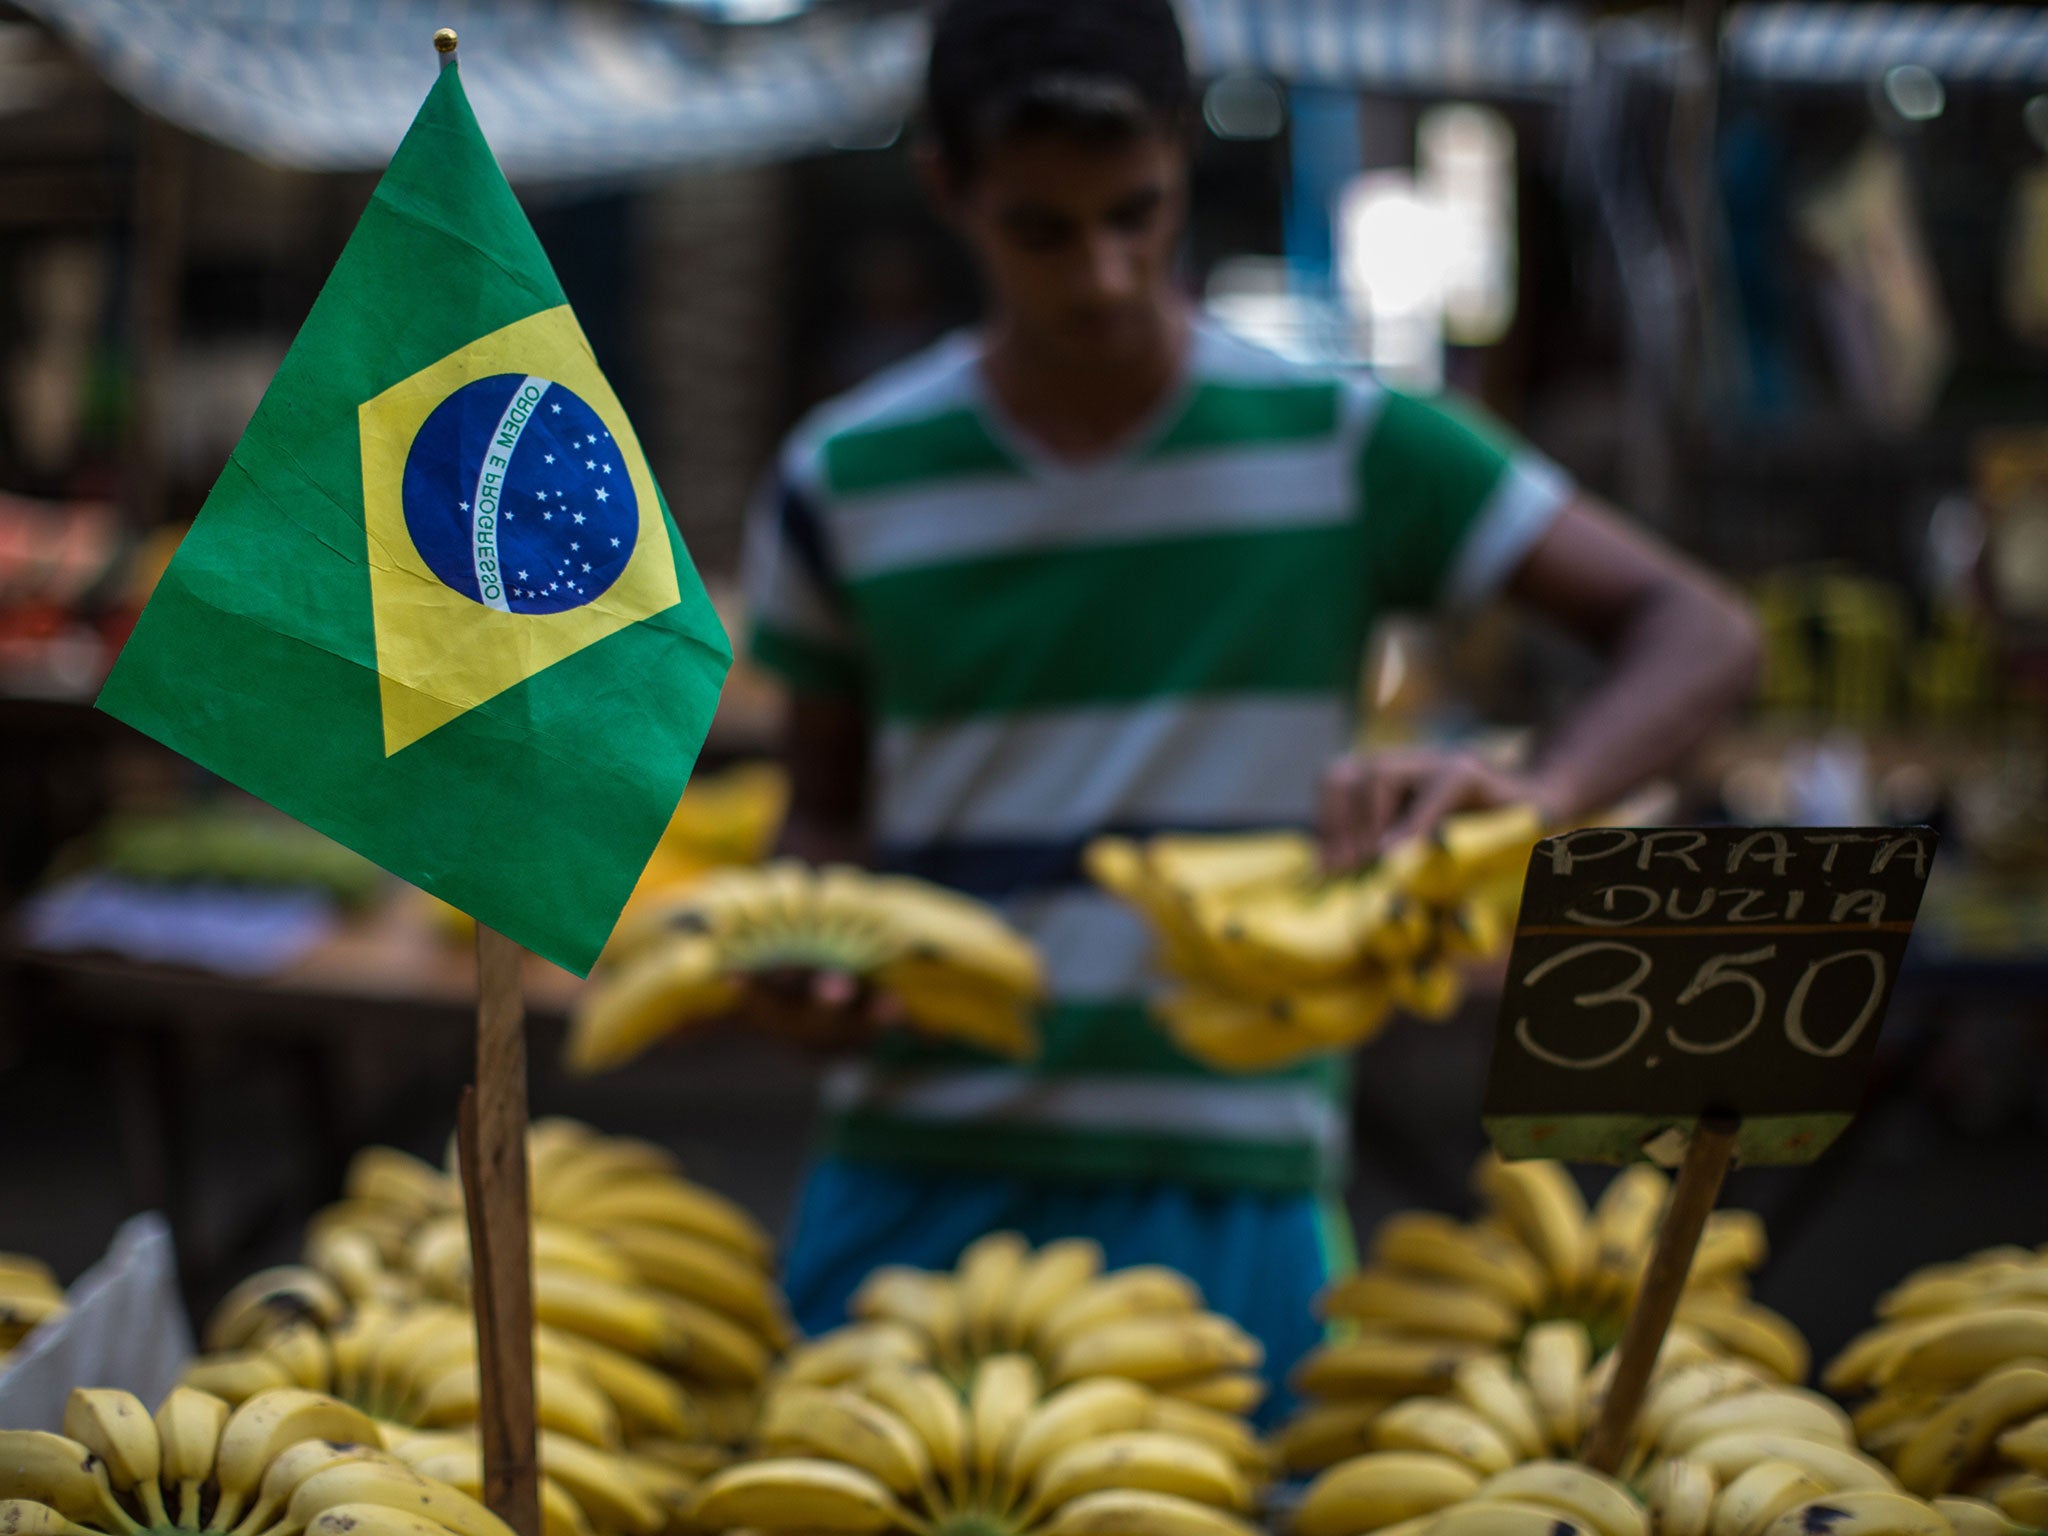 A stallholder sells bananas at Mare complex shantytown (favela) in Rio de Janeiro, Brazil, on June 7, 2014, five days before the start of the FIFA World Cup